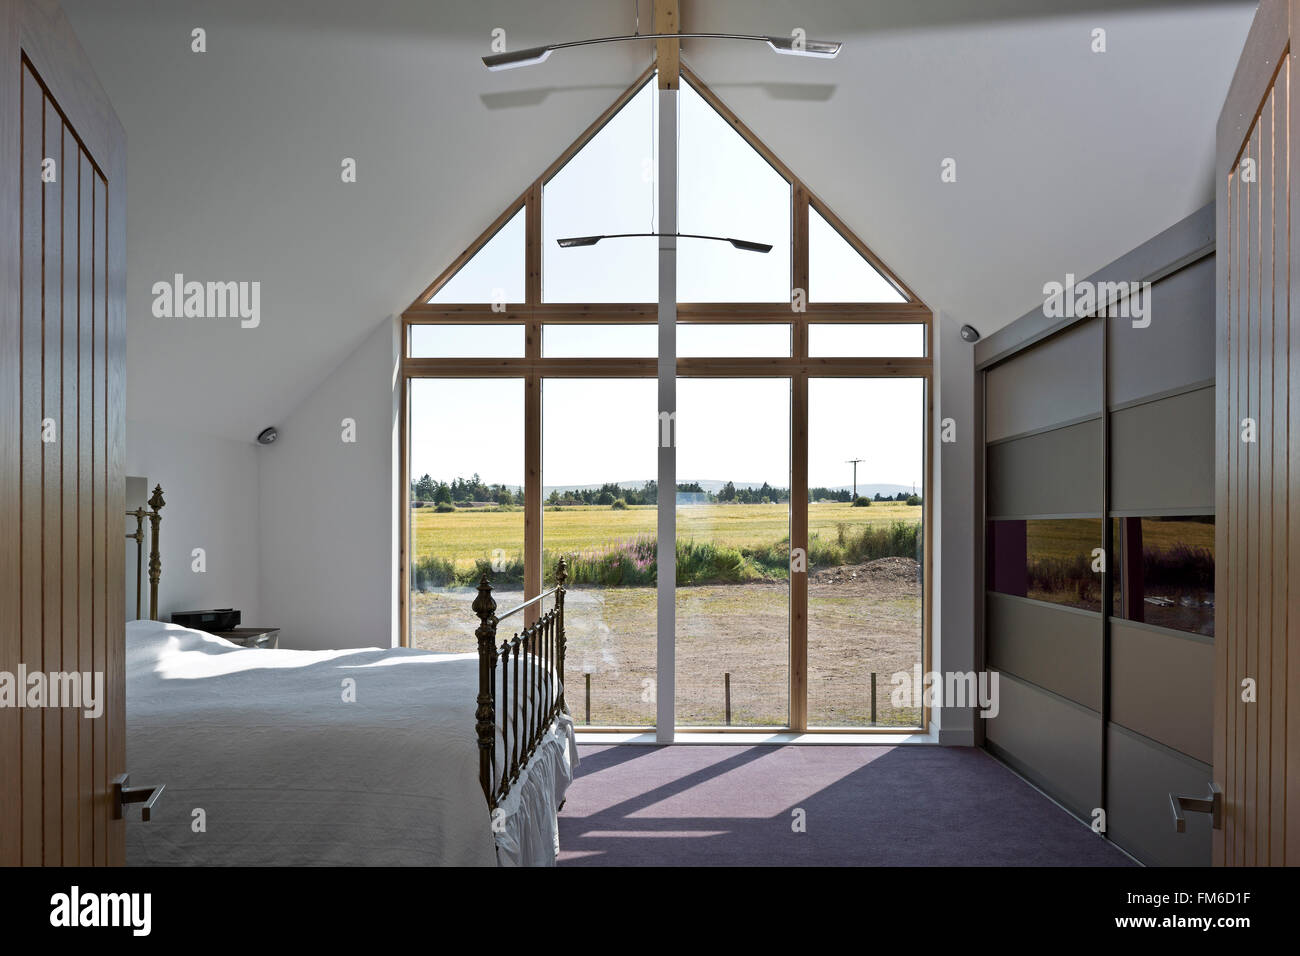 An interior view of a modern residential property called the Amor House, in Gleneagles, showing the large window to the bedroom. Stock Photo